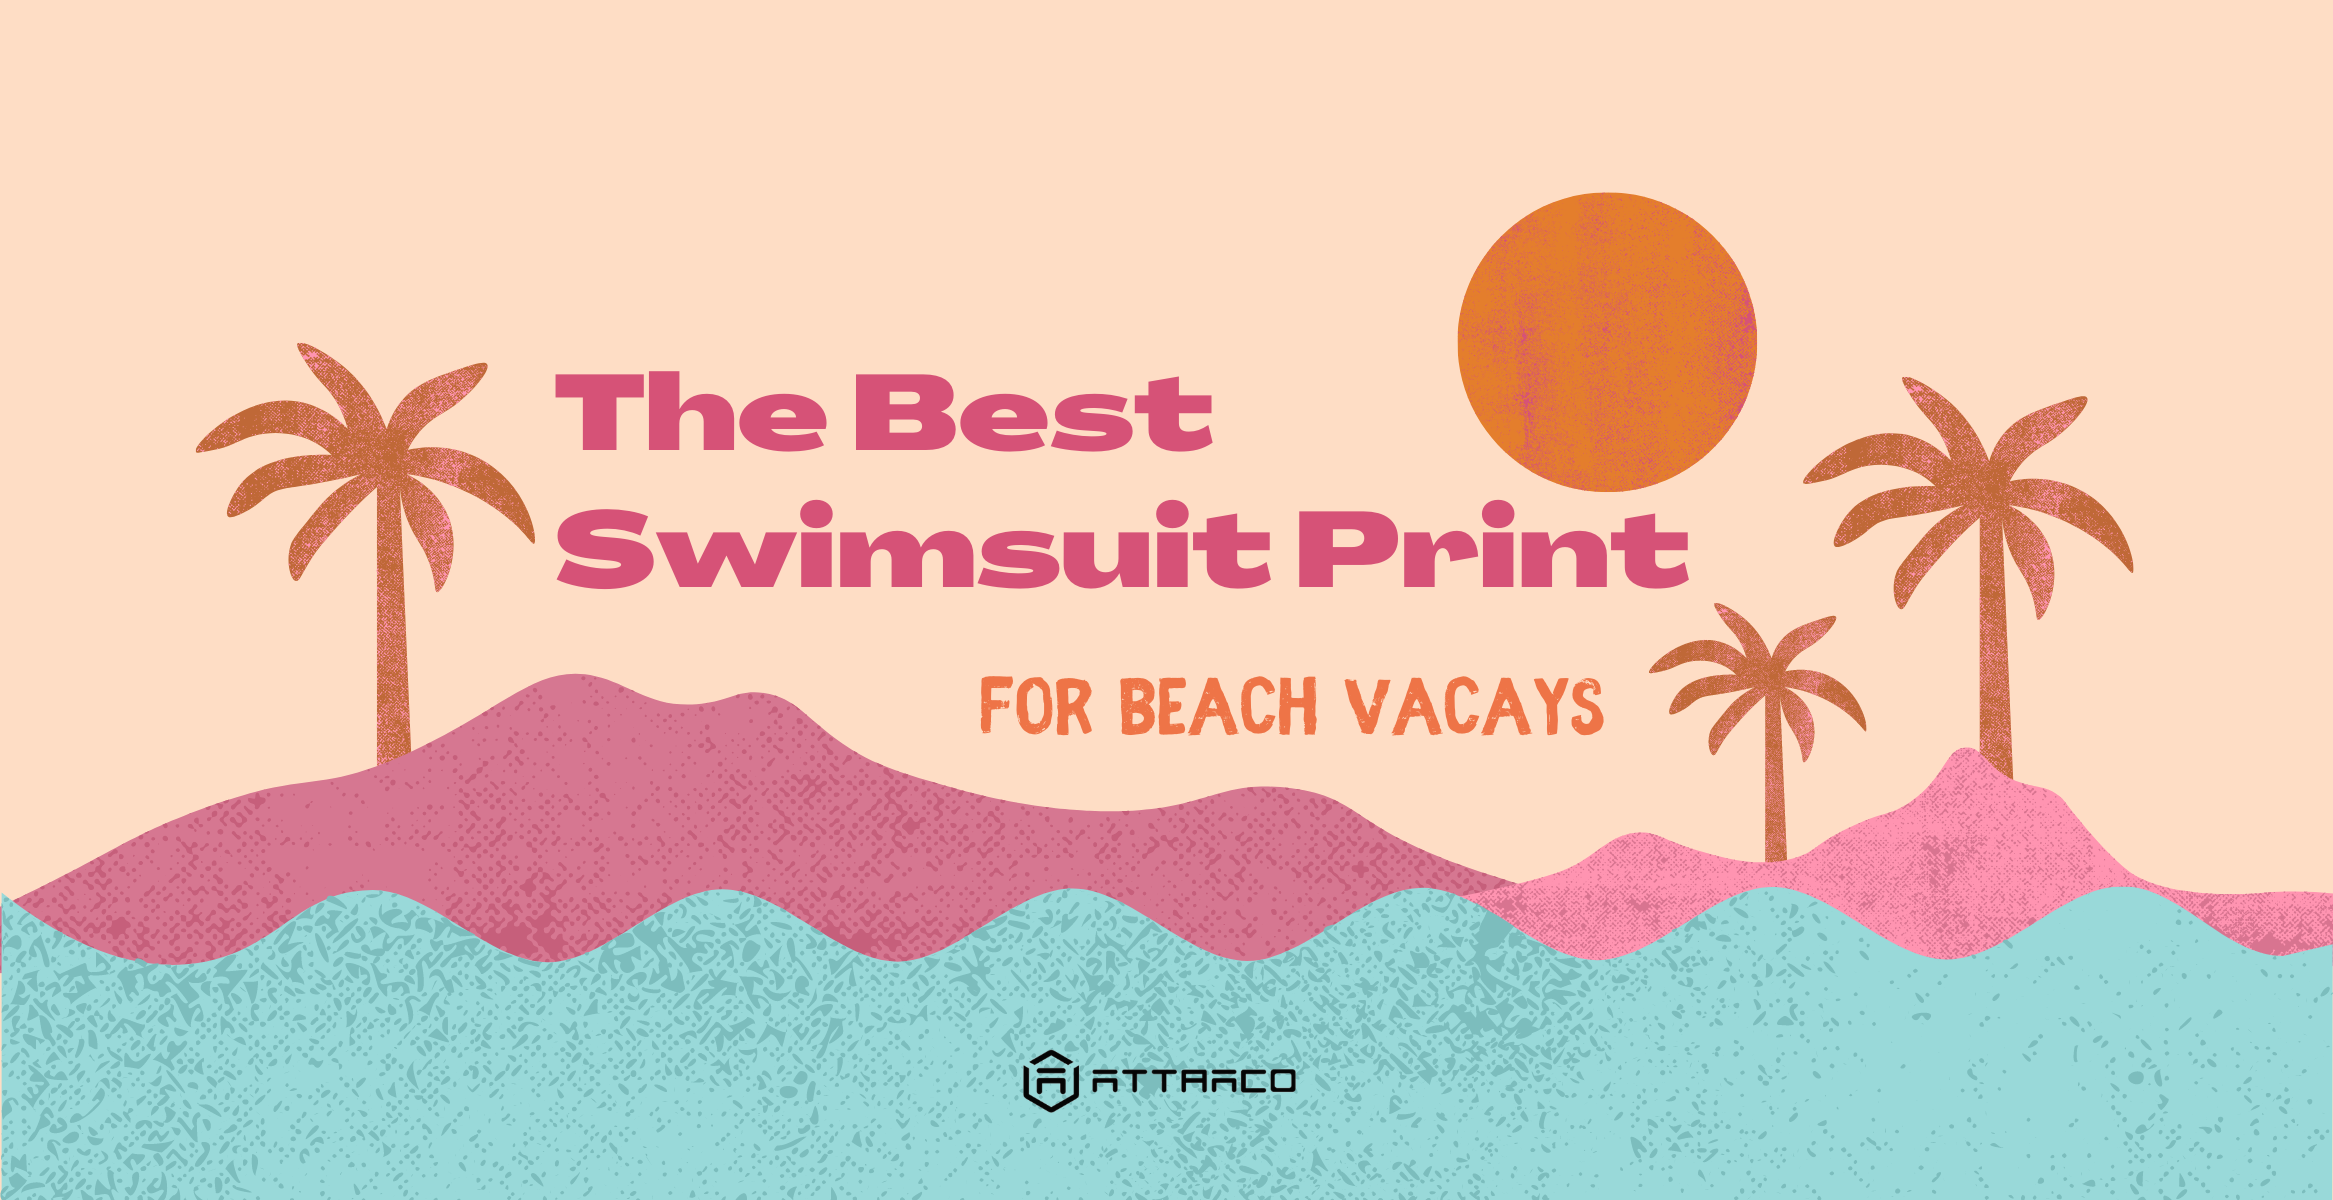 What Is The Best Swimsuit Print To Wear At The Beach Vacays?